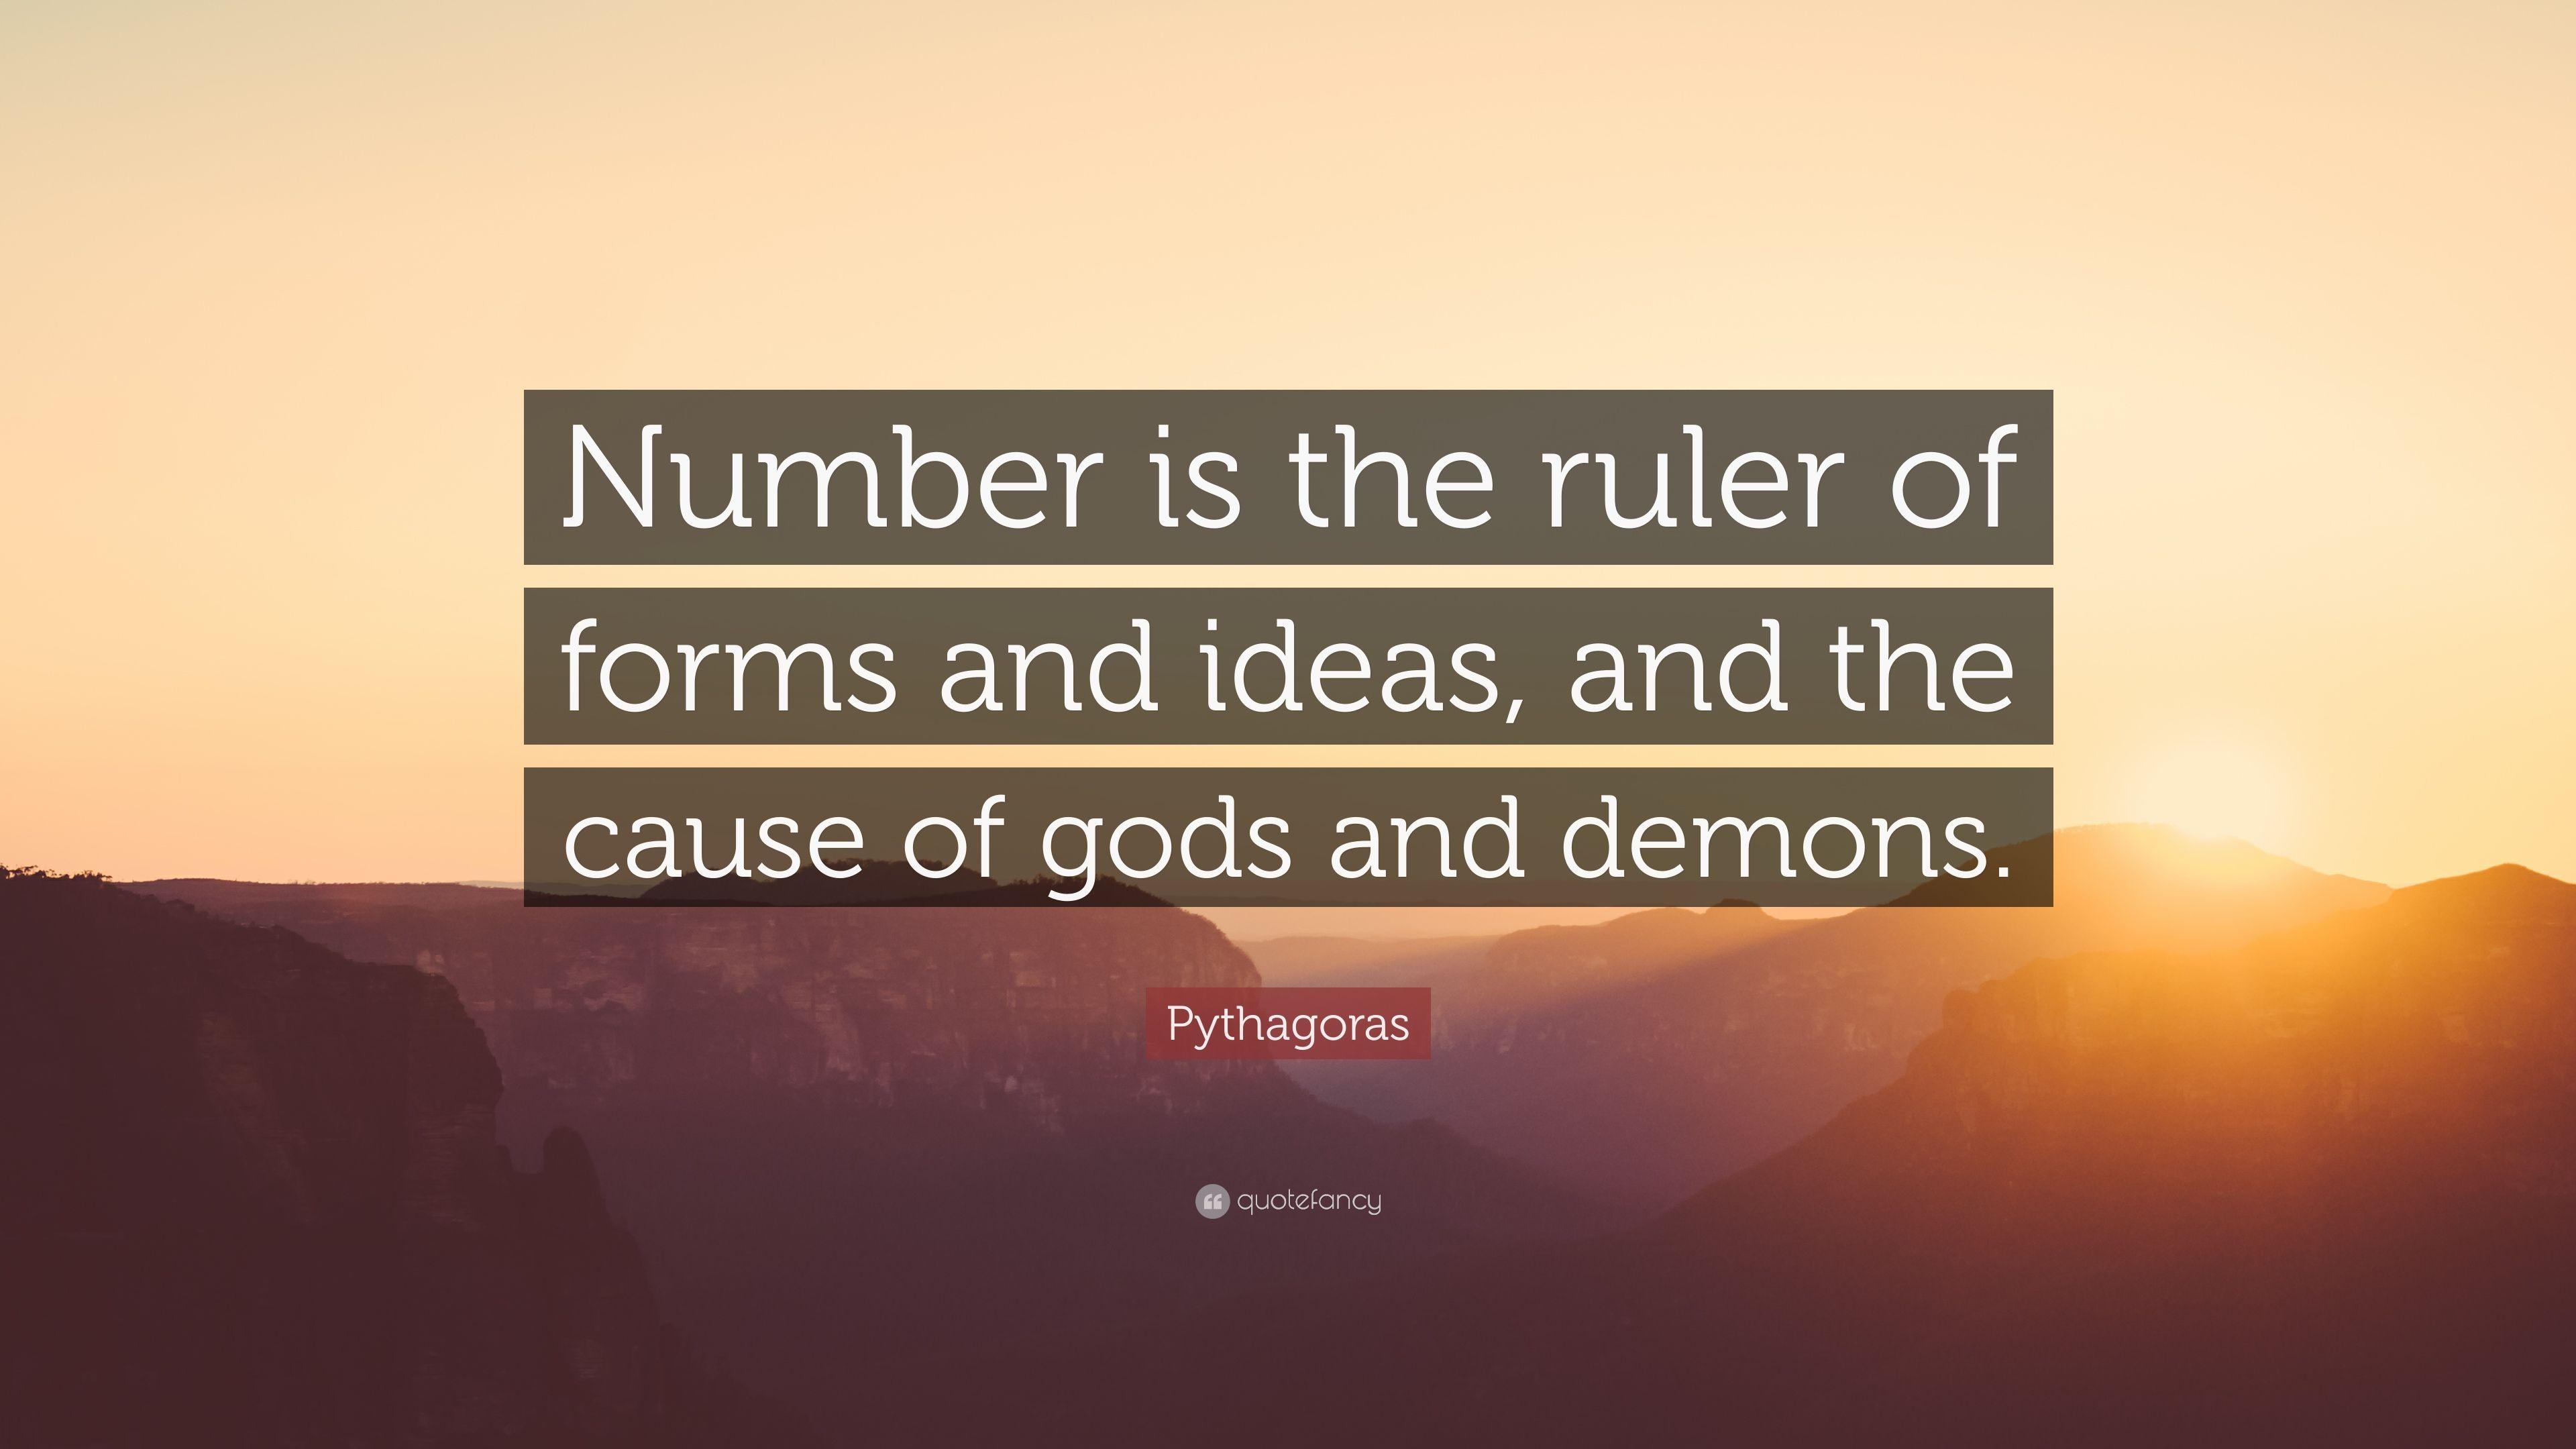 Pythagoras Quote: “Number is the ruler of forms and ideas, and